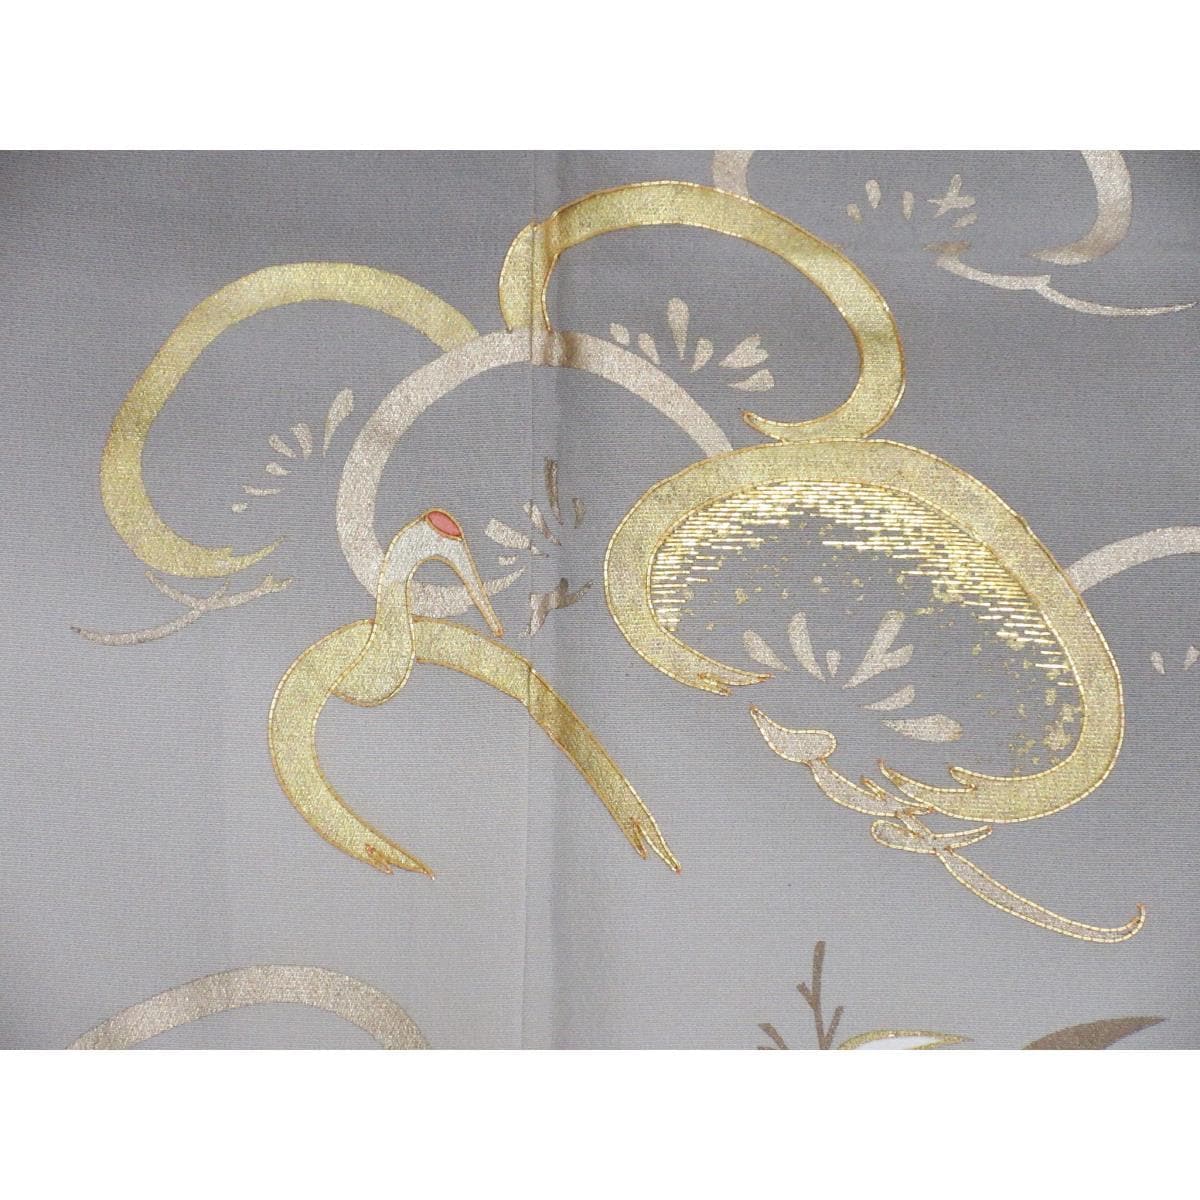 Colored tomesode, Yuzen gold painting, embroidery, blurred dyeing, round and horizontal quince